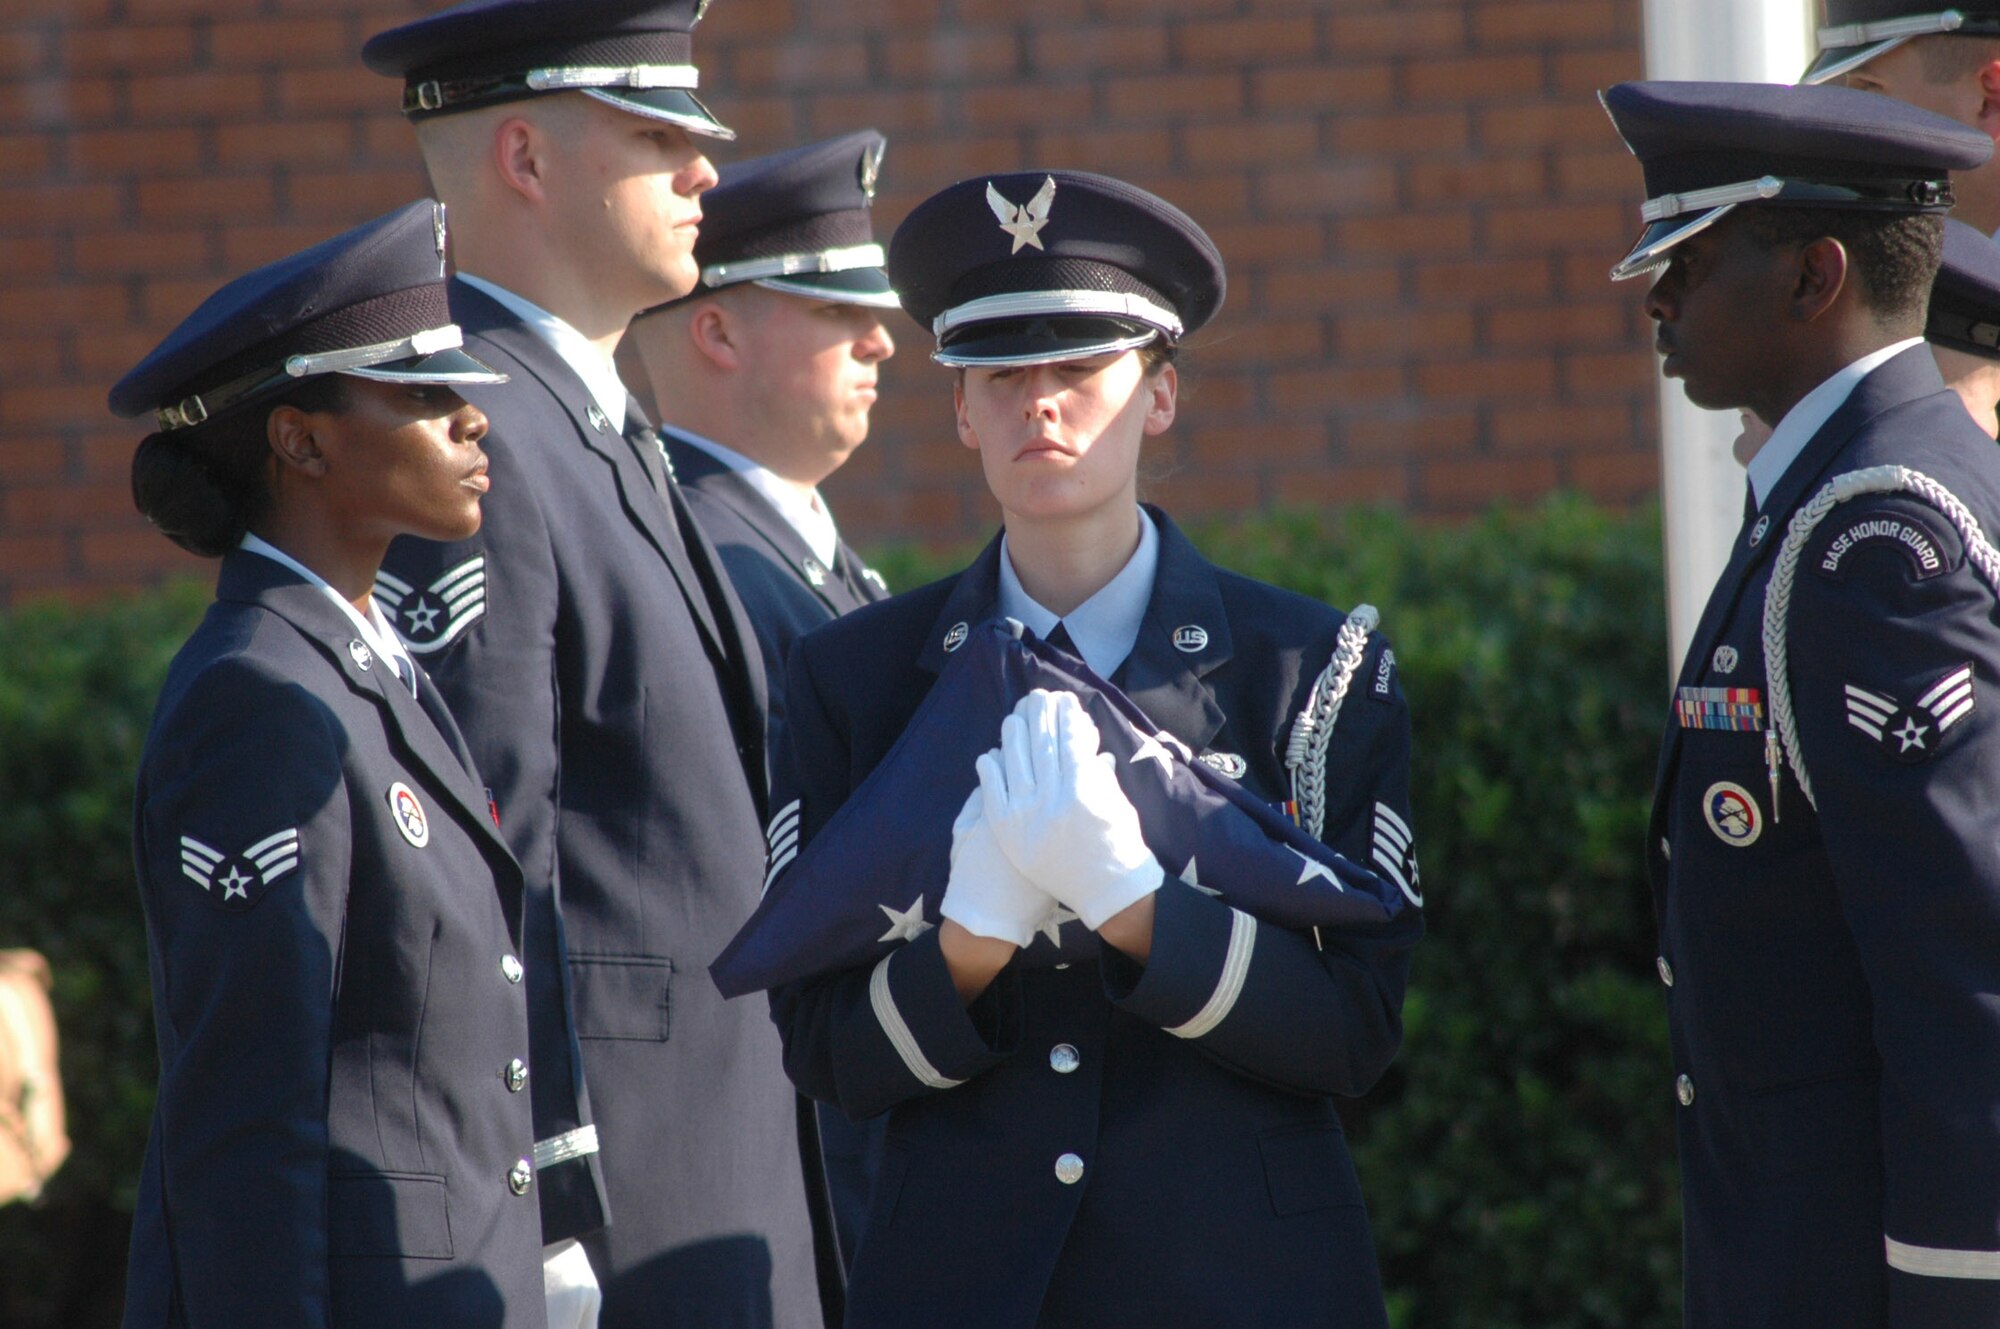 Staff Sgt. Shannon Lampo, a member of the Robins Honor Guard, secures the flag.  U.S. Air Force photo by Sue Sap